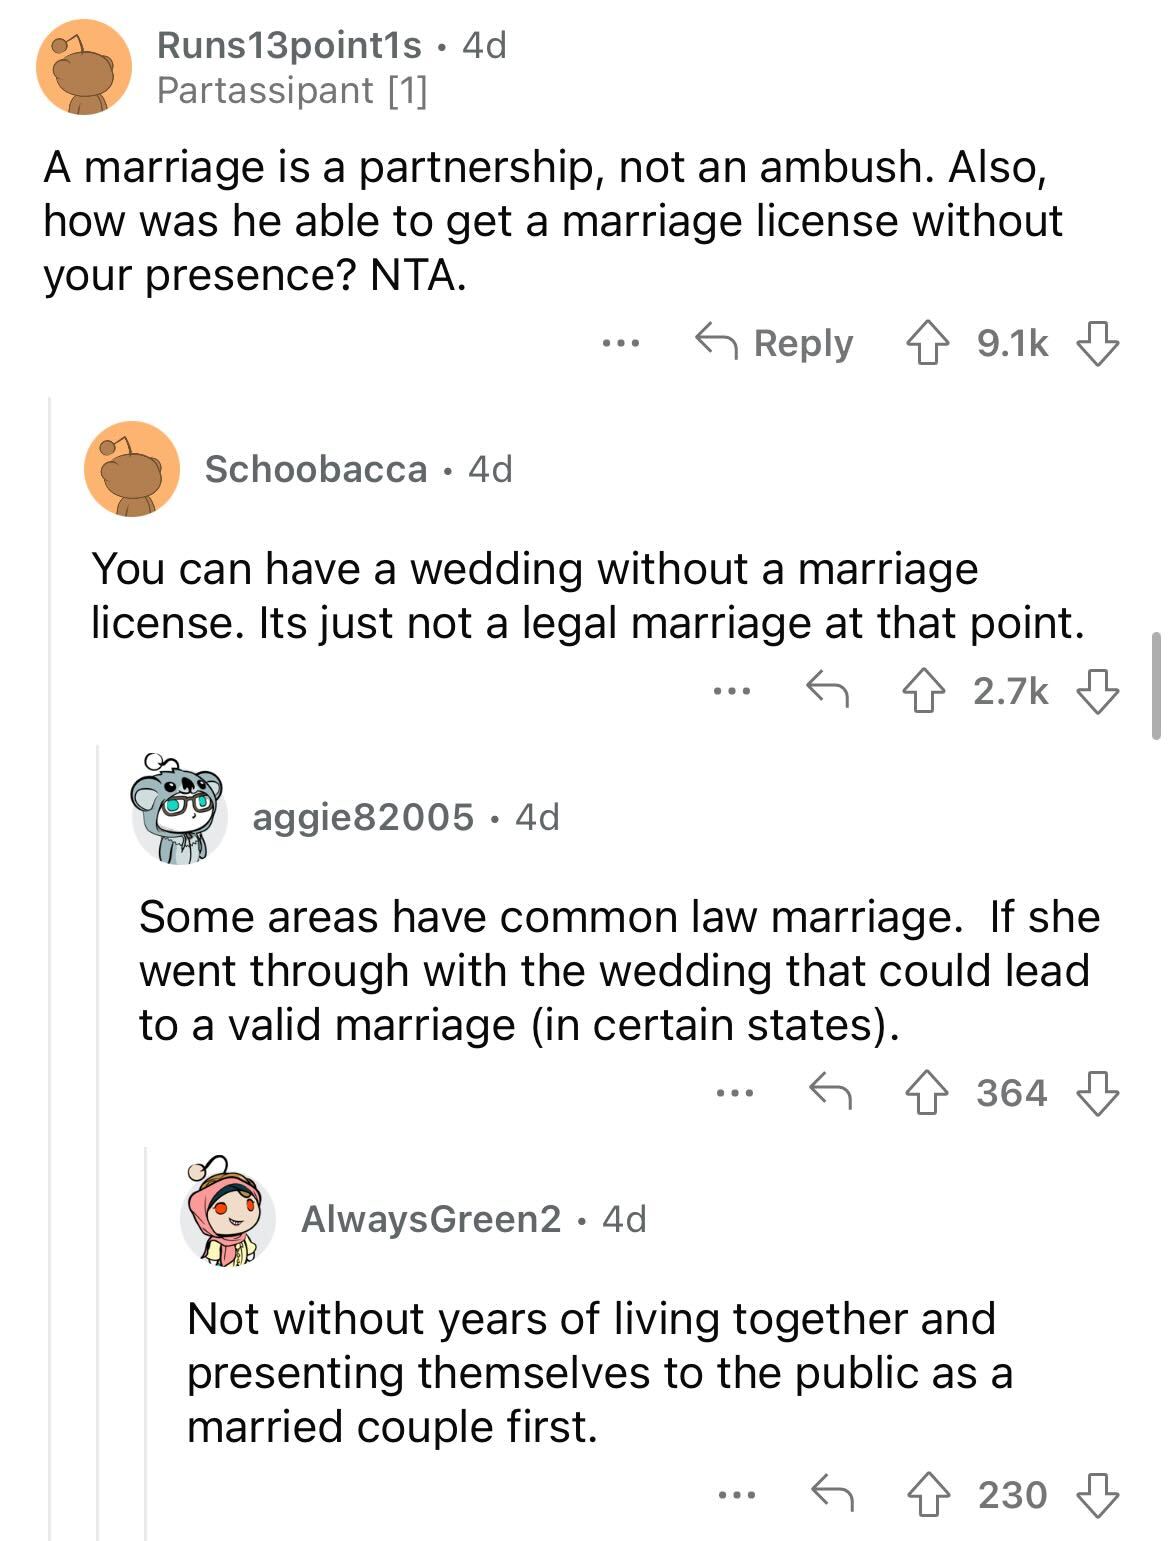 am i the asshole thread on reddit - document - Runs13point1s. 4d Partassipant 1 A marriage is a partnership, not an ambush. Also, how was he able to get a marriage license without your presence? Nta. Schoobacca 4d ... aggie82005 4d You can have a wedding 